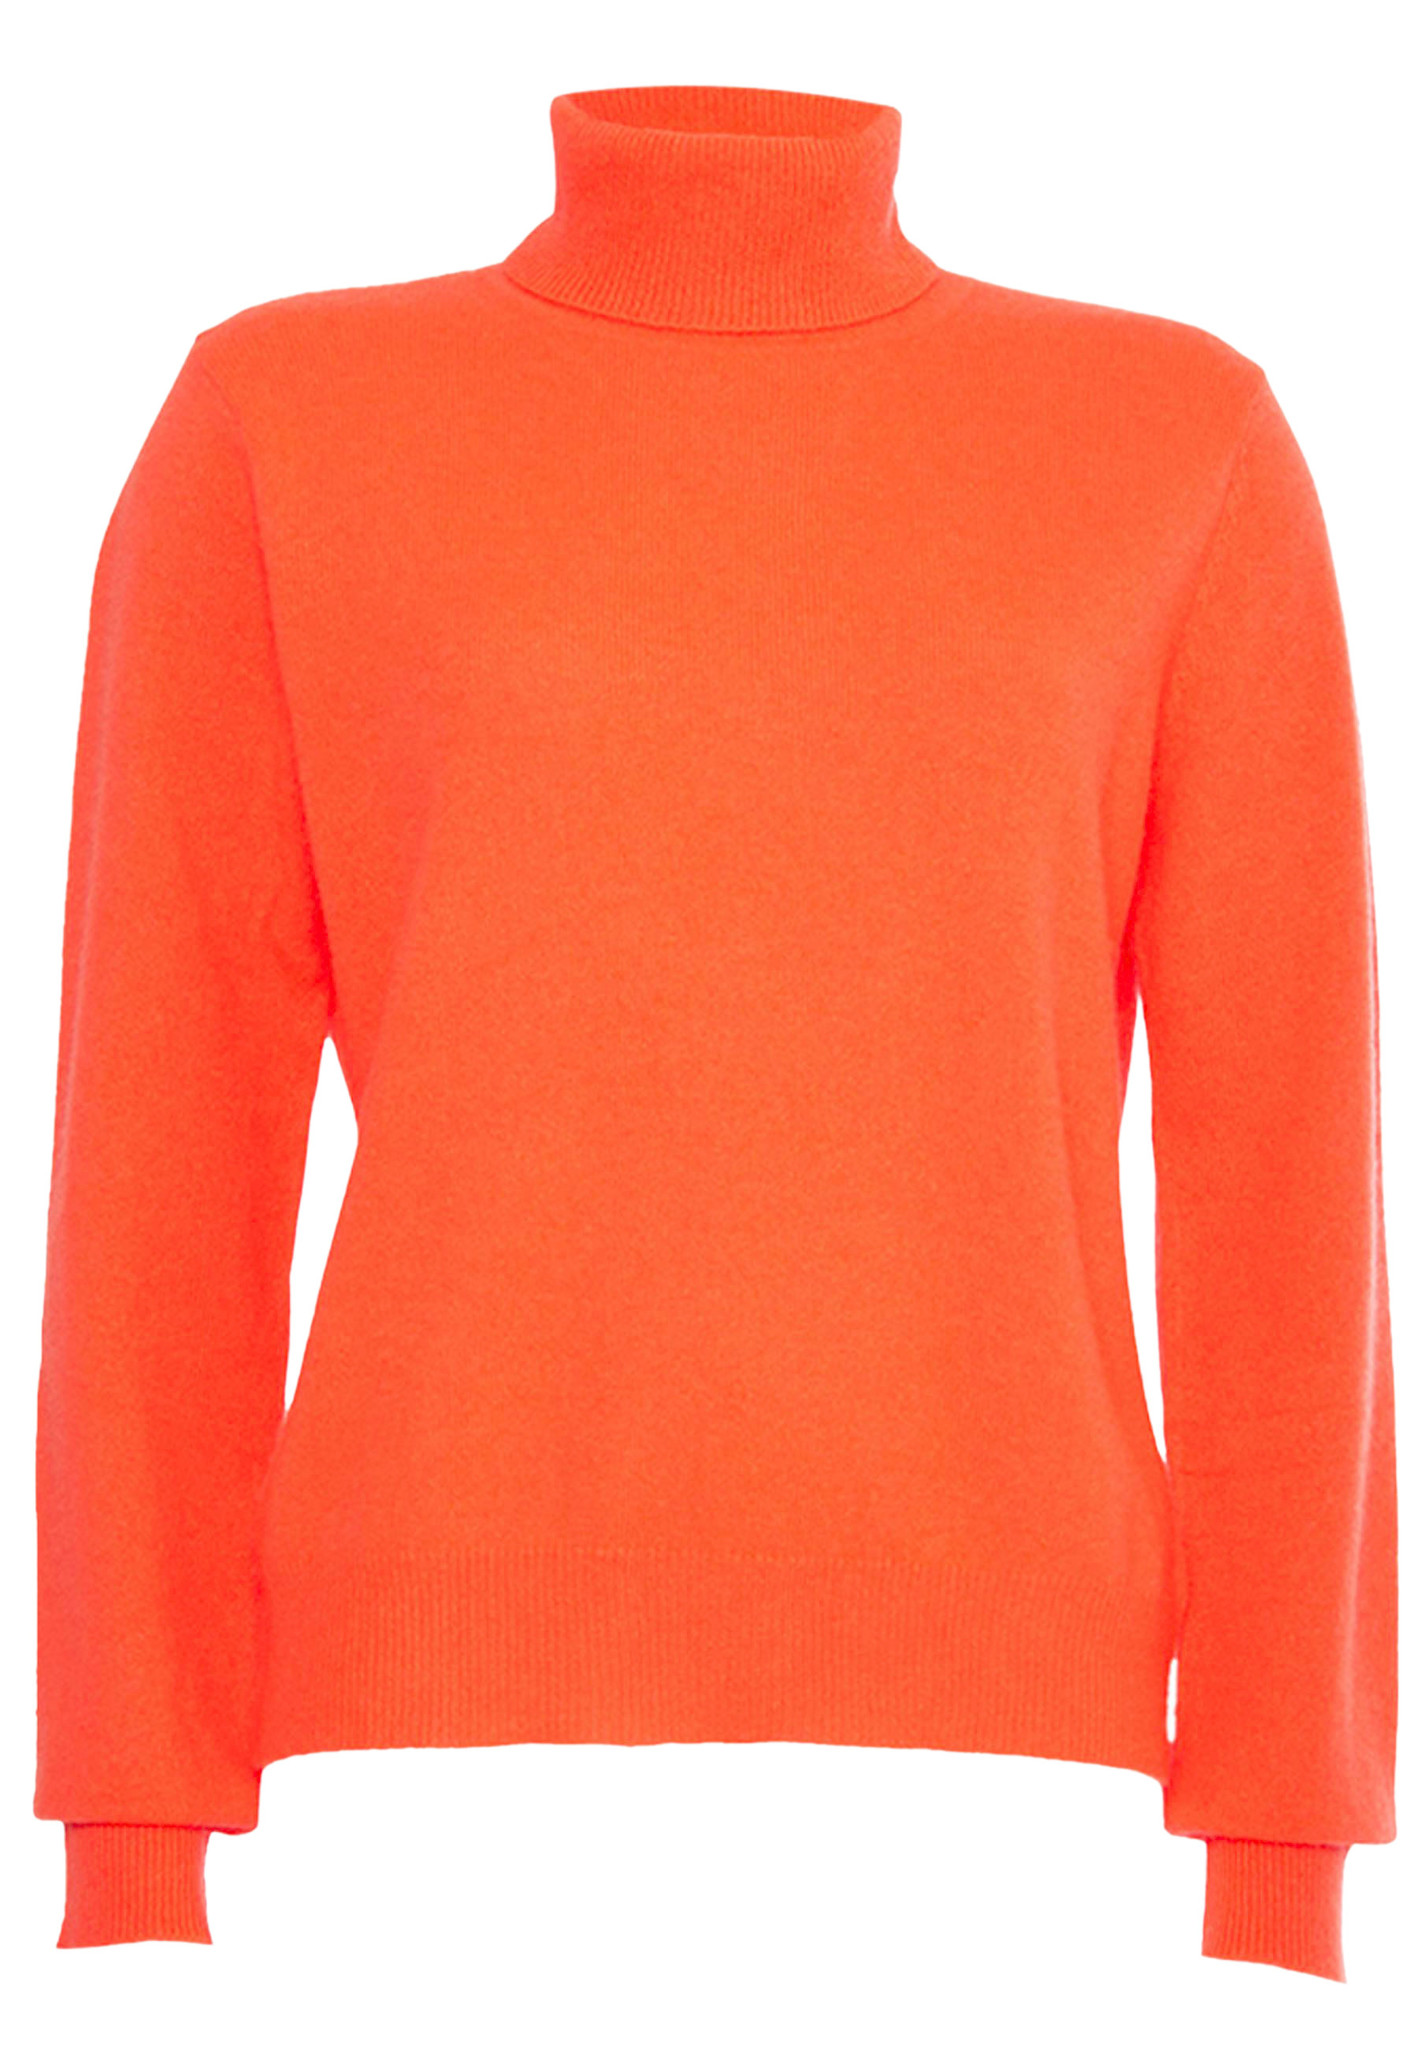 Absolut Cashmere Themys Coltrui Koraal Dames maat L